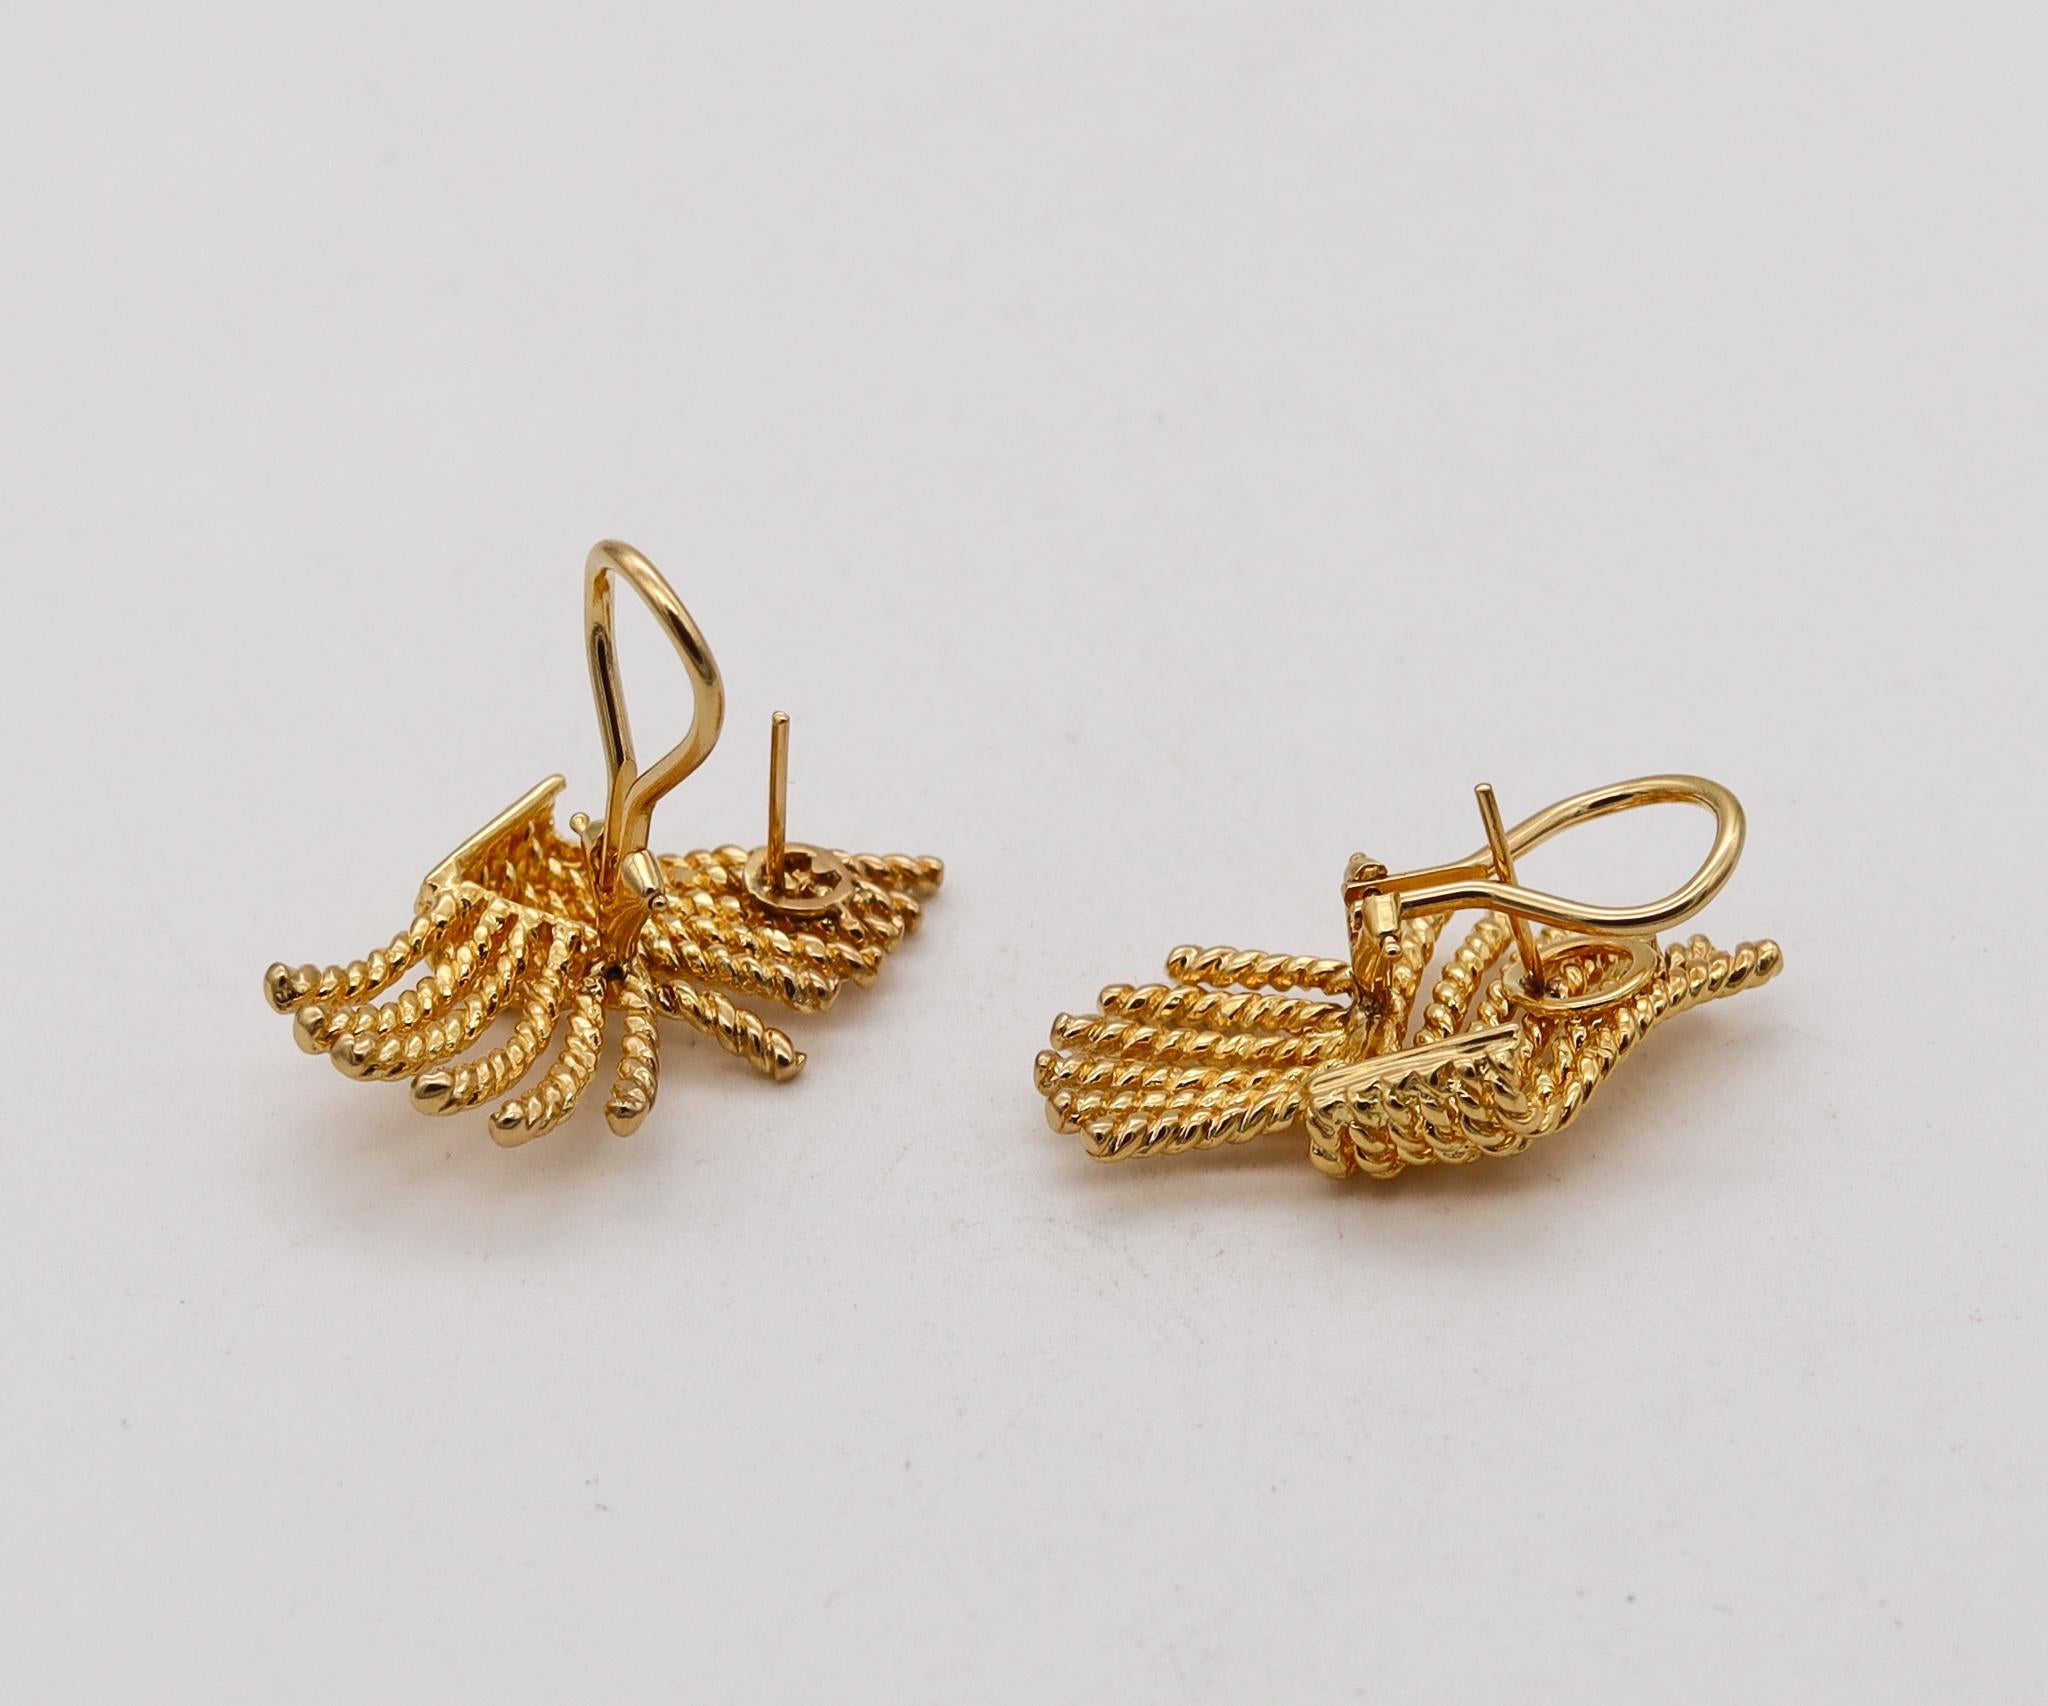 Women's Modernist Retro 1970 Twisted Spikes Ropes Earrings in 18Kt Yellow Gold